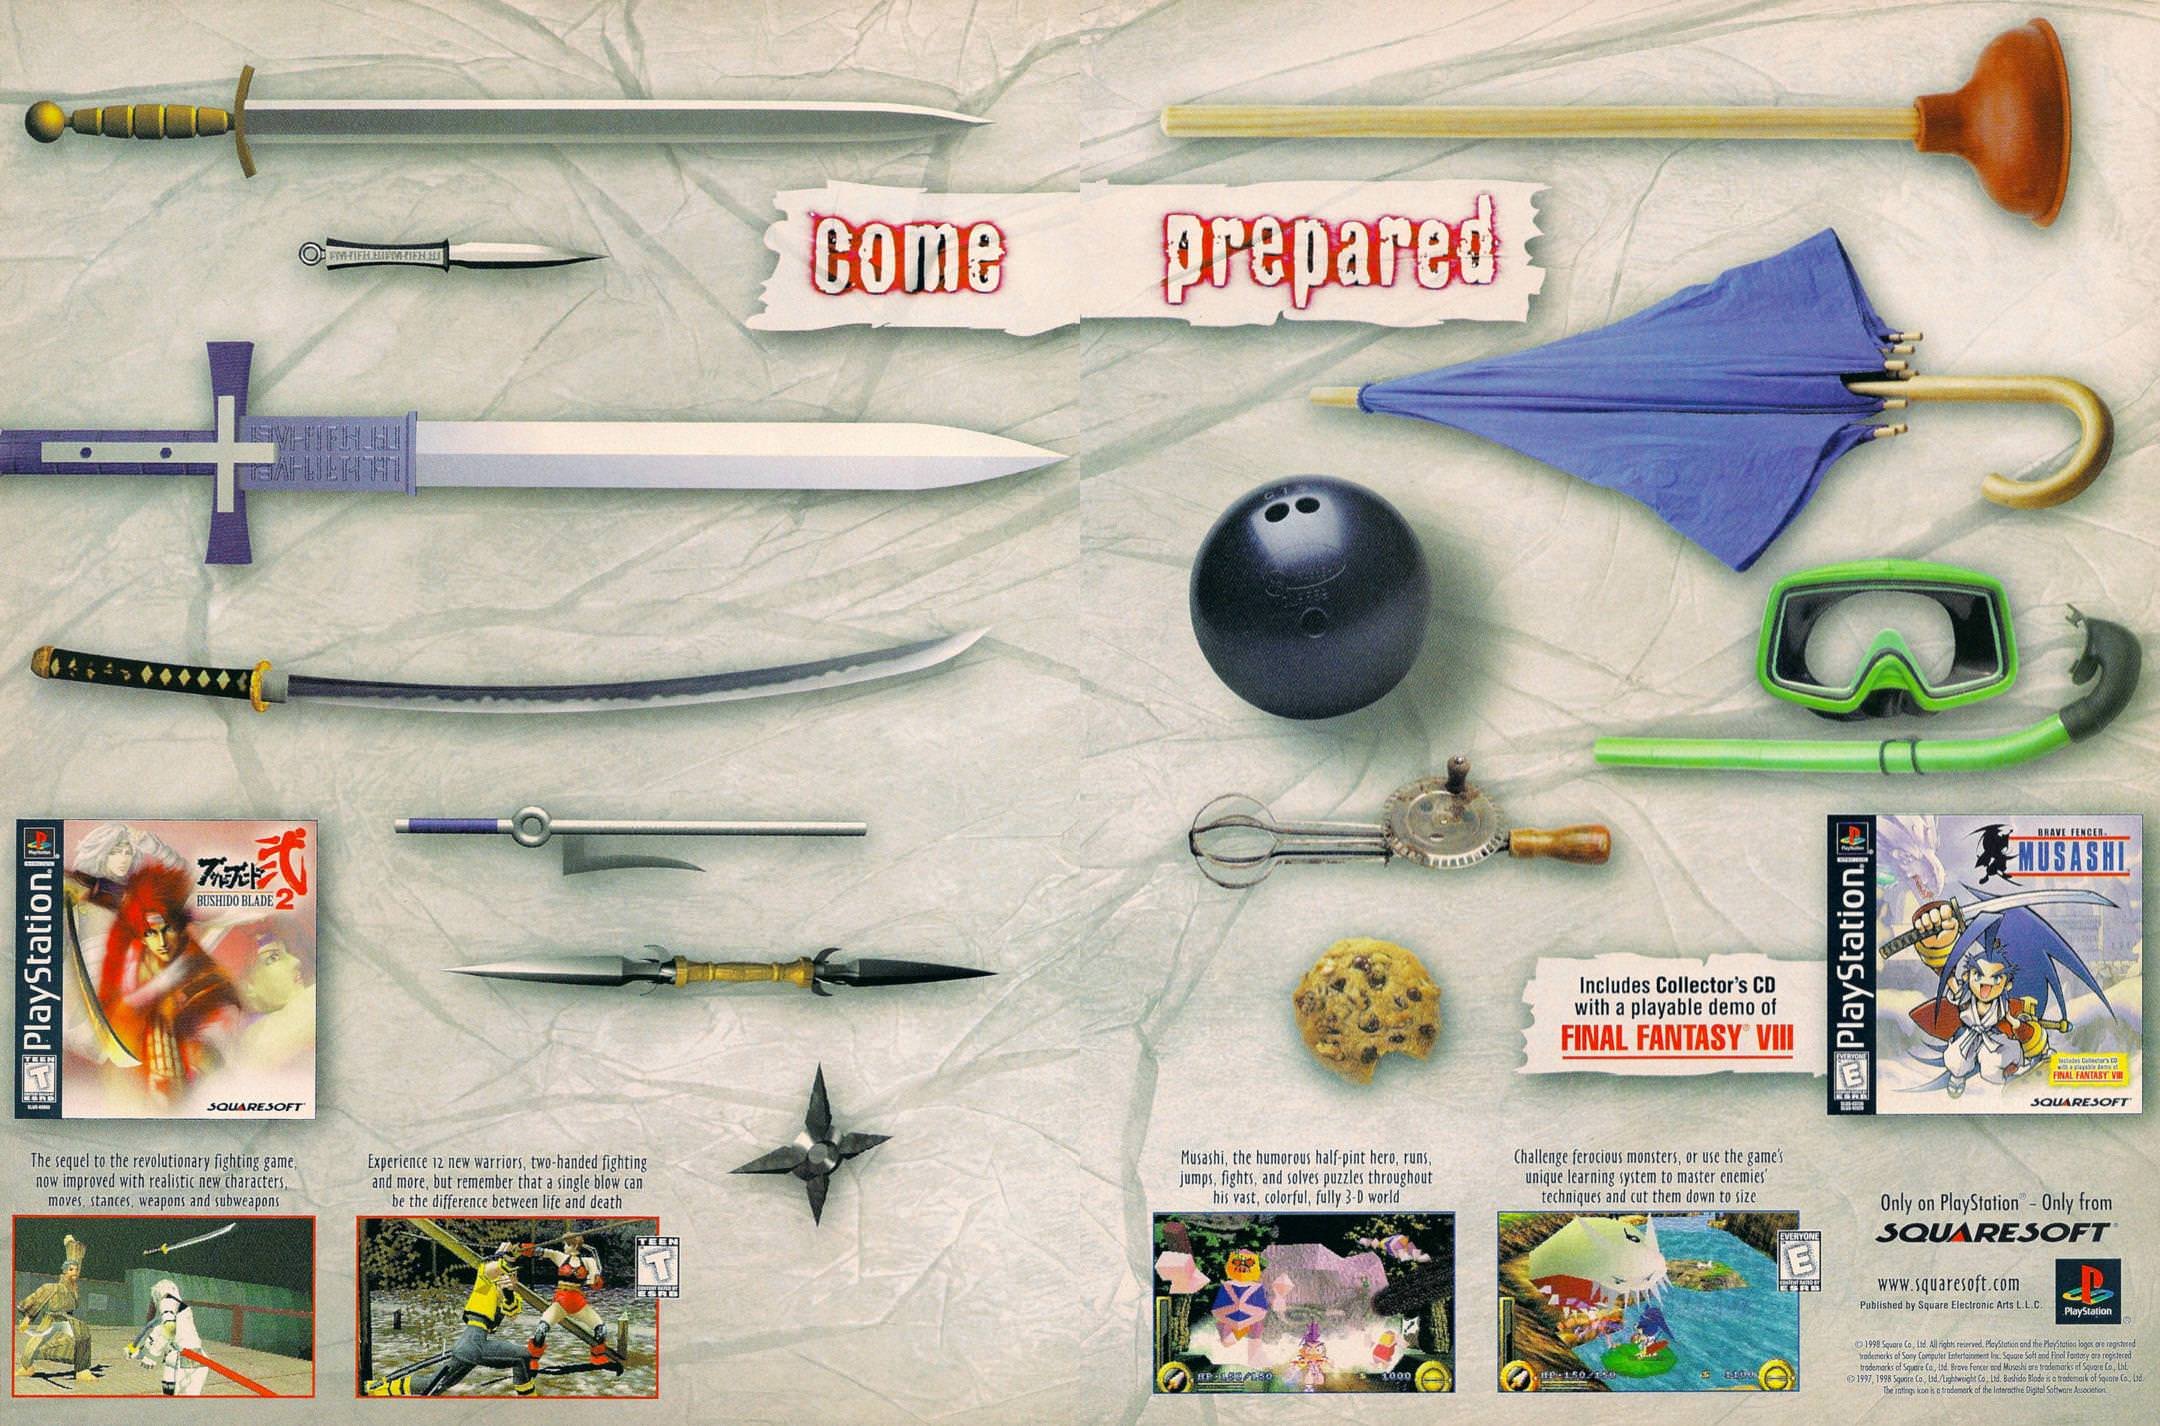 Vintage 90s Gaming Ads To Send You Back In Time